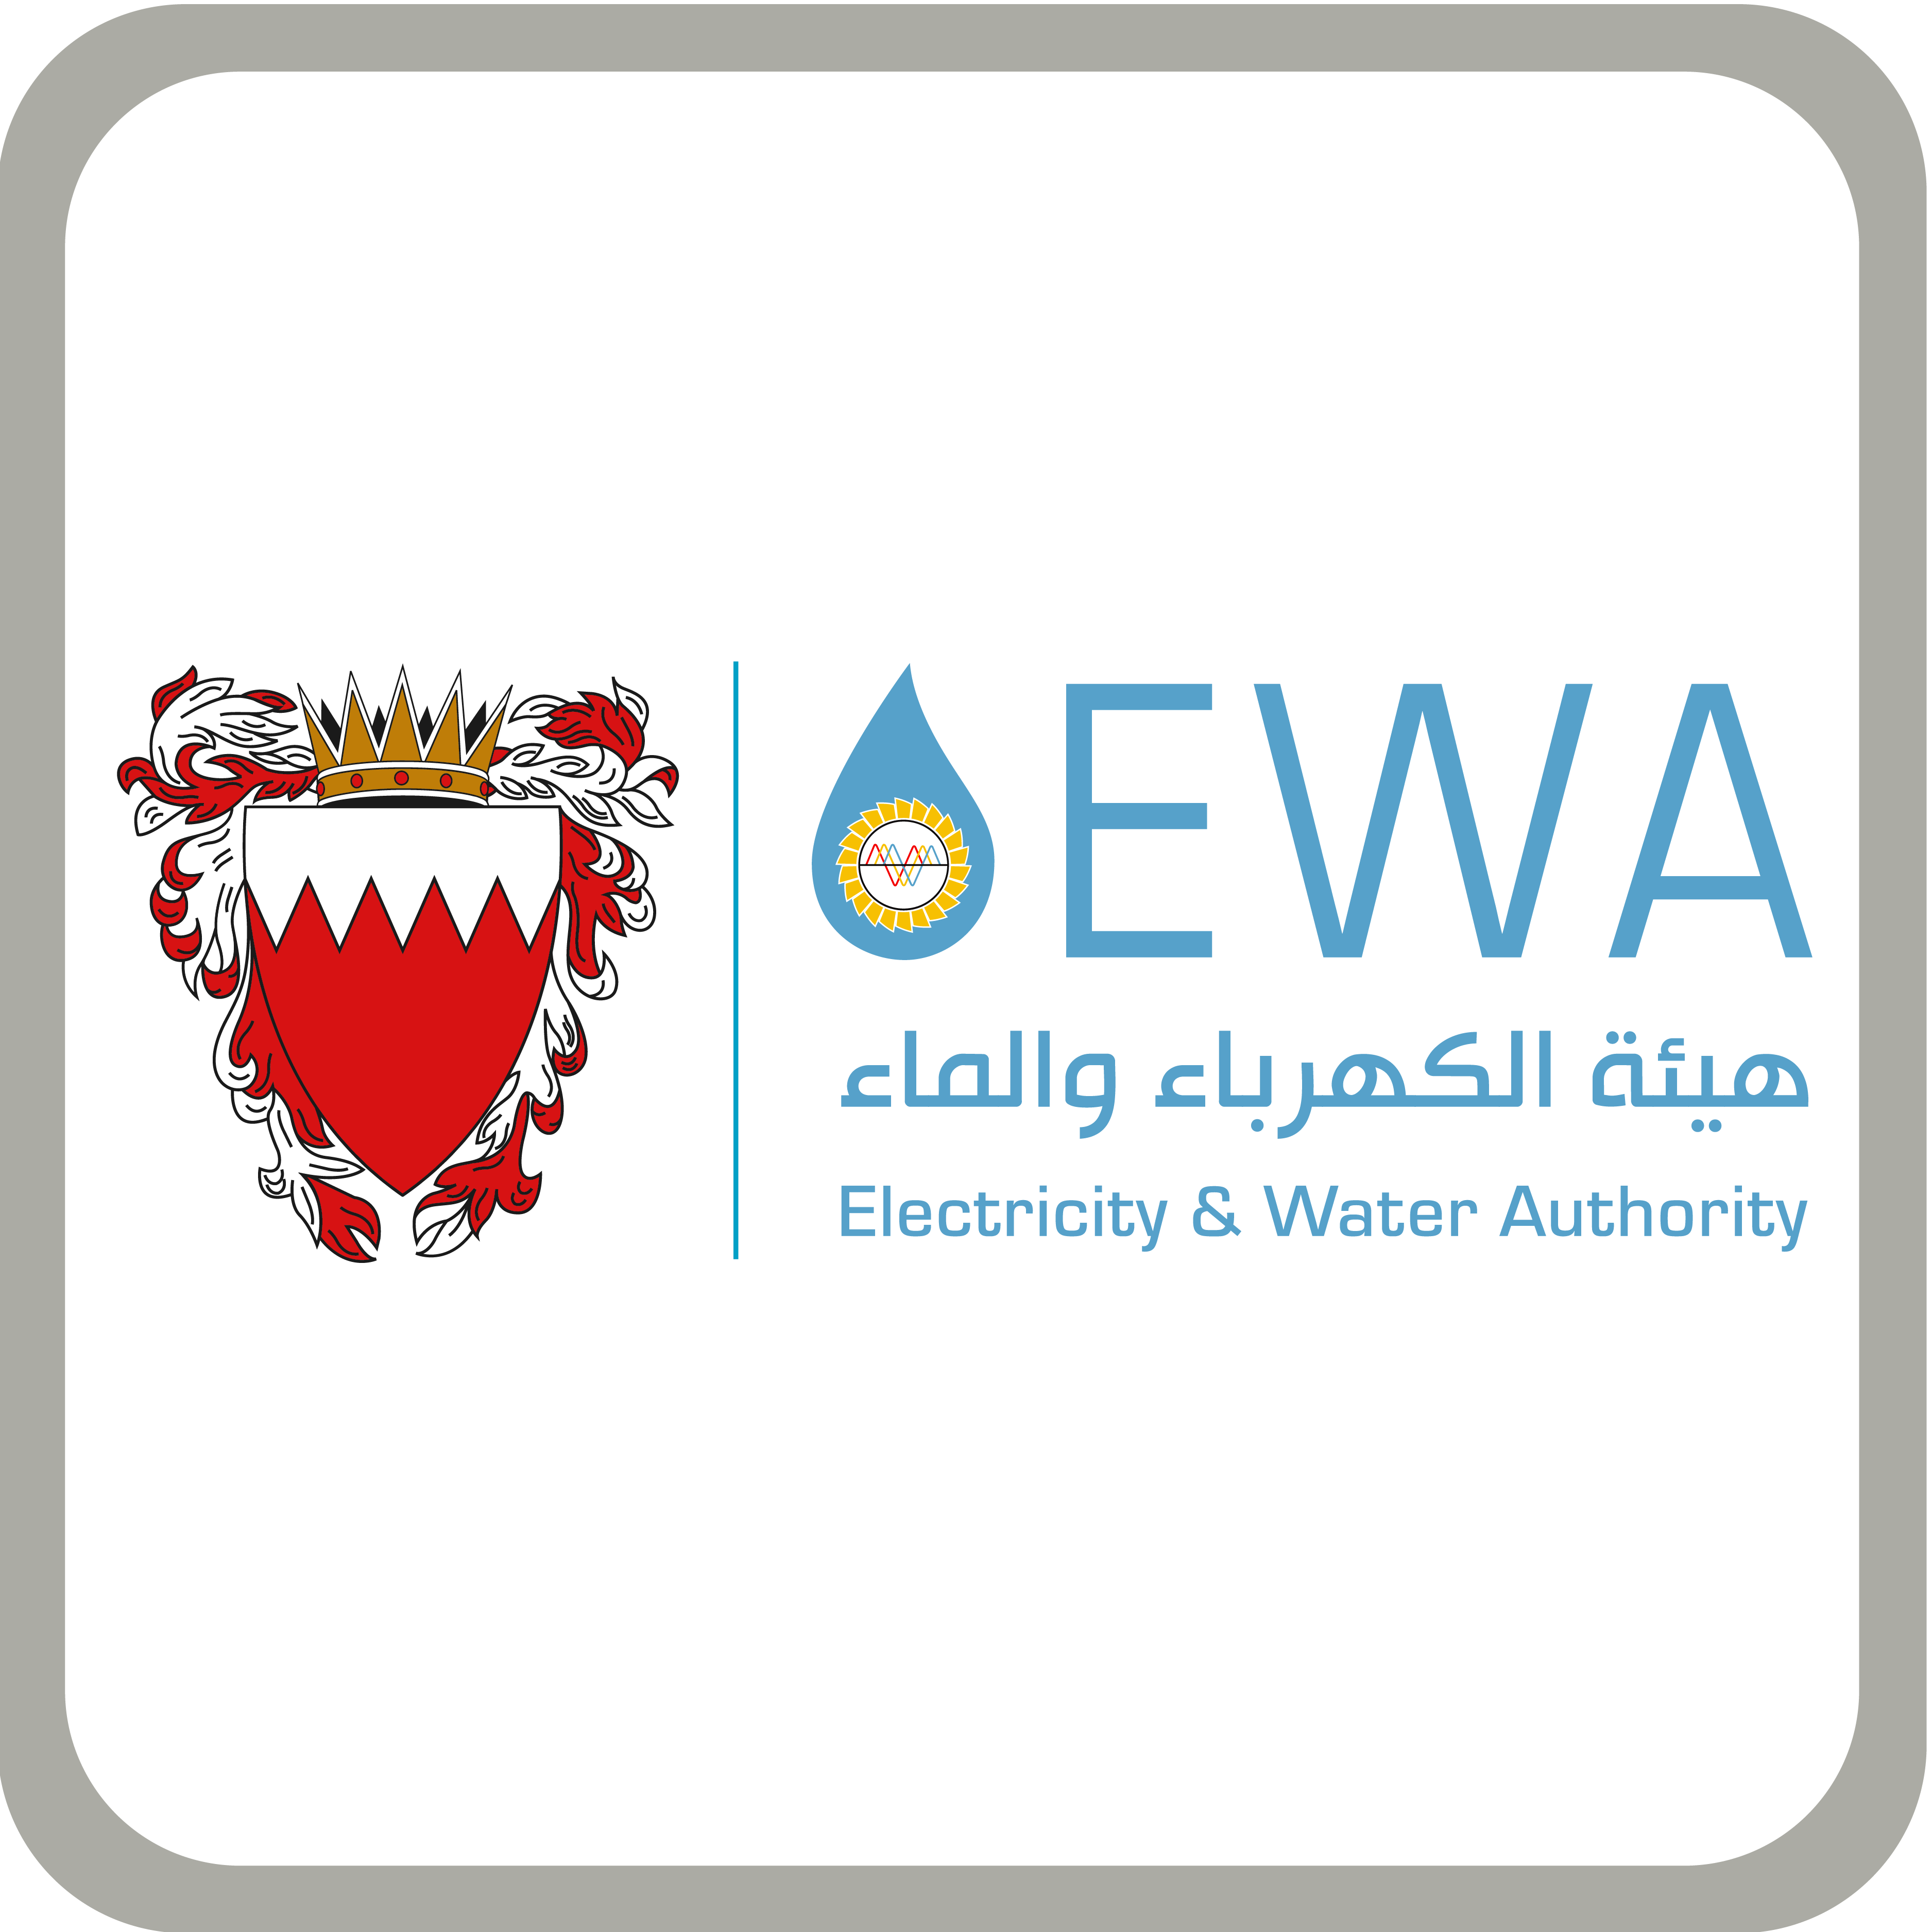 Electricity and Water Authority